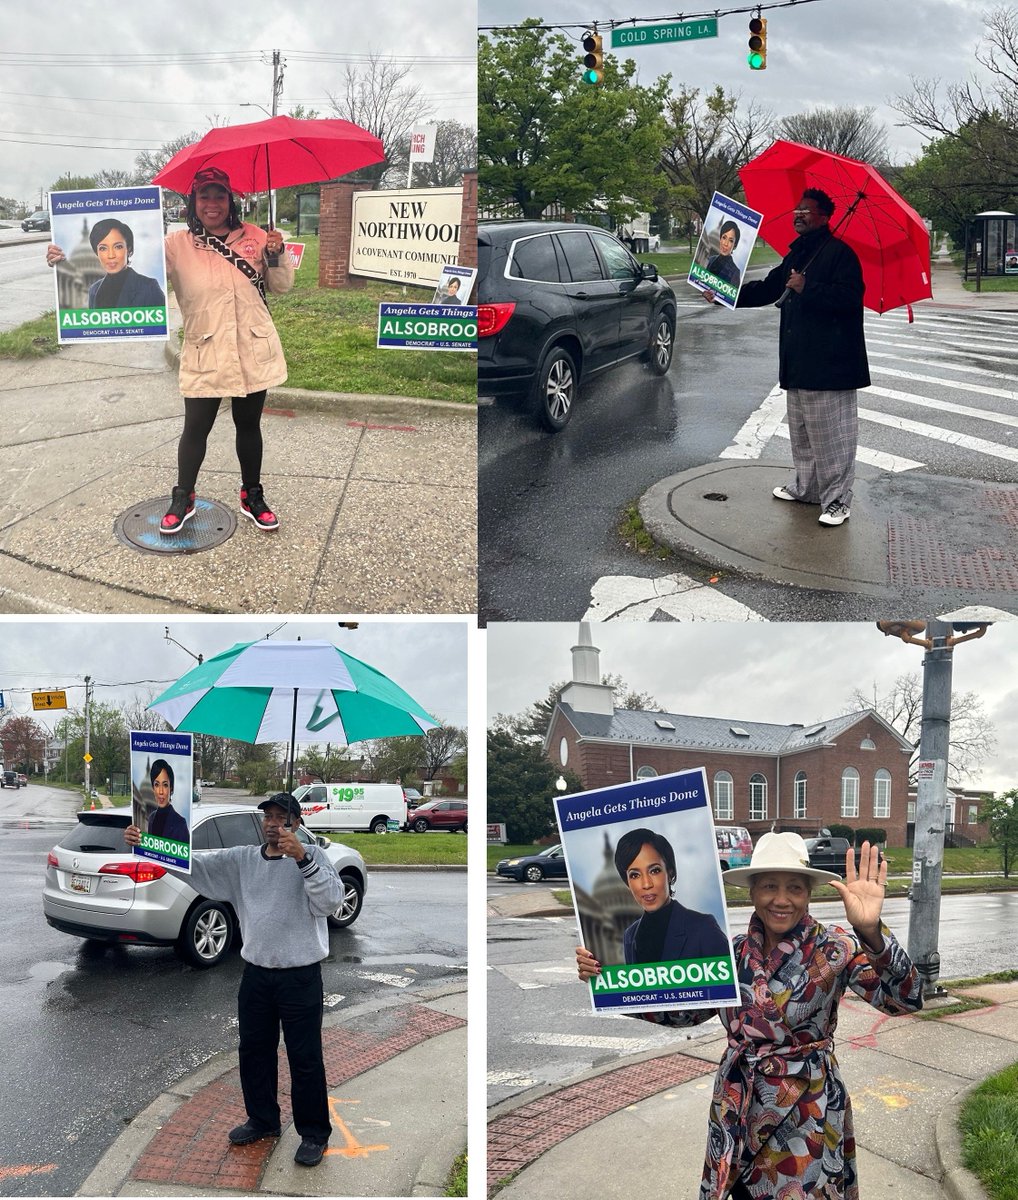 RAIN DOES NOT STOP US - Friday, it was Delta Sigma Theta and others waving Angela Alsobrook for Senate. April 18 we will be in Baltimore at Archentrolly Terrace & Druid Hill Ave. 7-9 am, rain or shine. Join us!